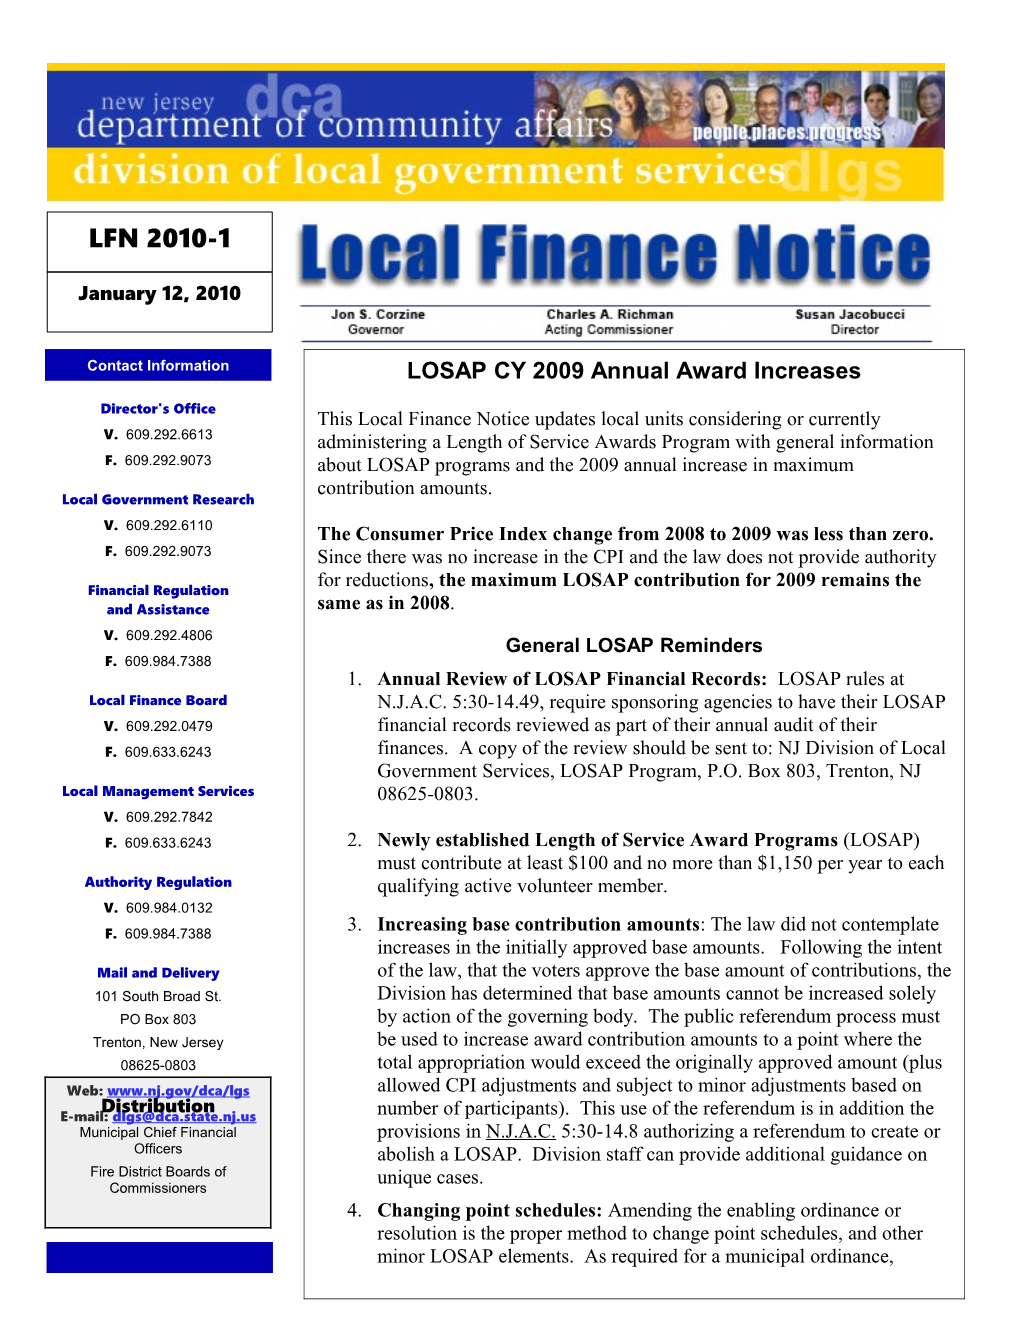 Local Finance Notice 2010-1January 12, 2010Page 1